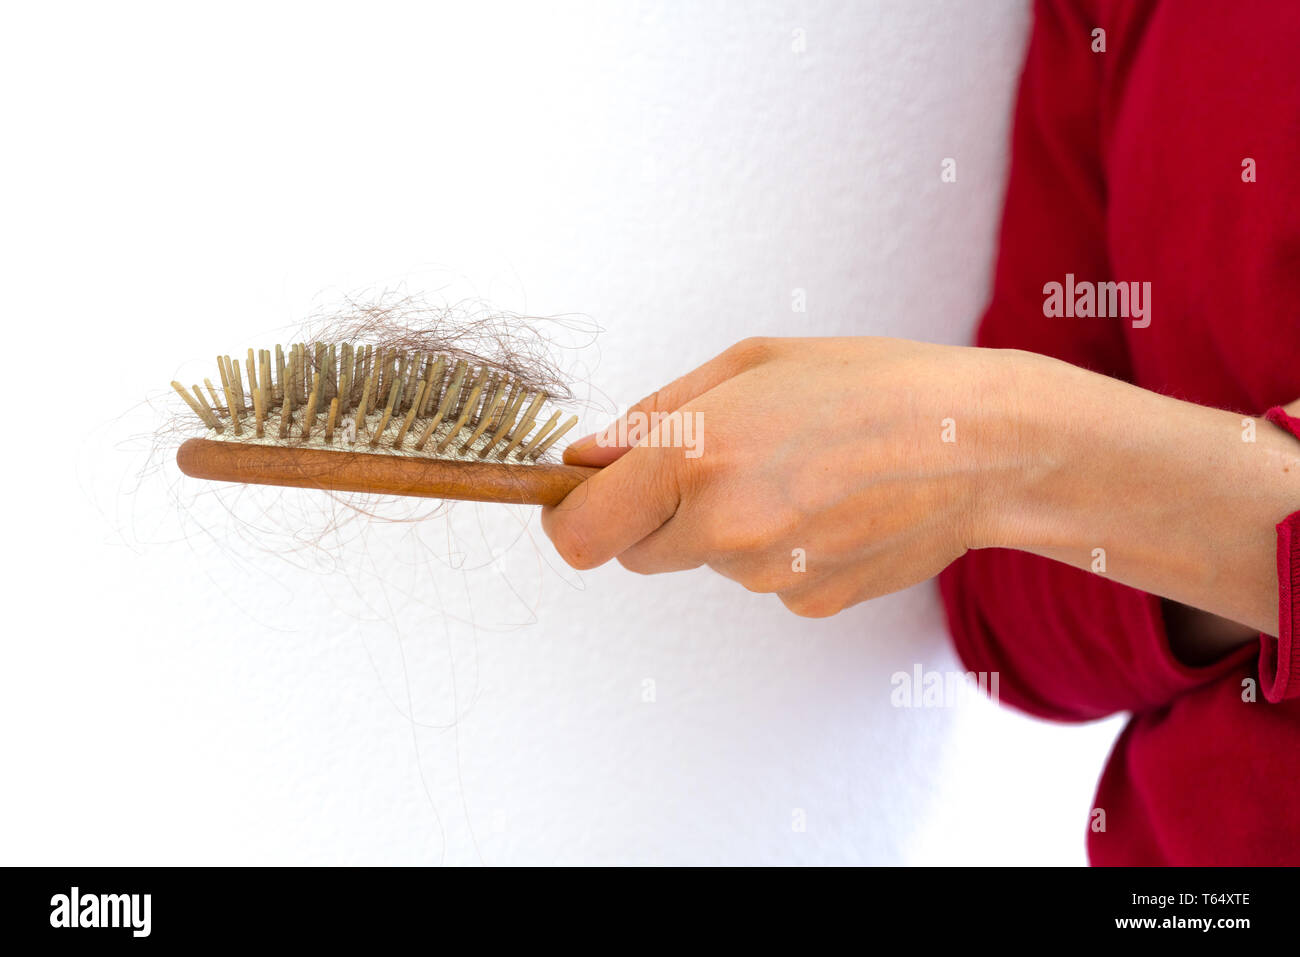 detail horizontal view of a female hand holding a hairbrush full of hair because of hair loss issue Stock Photo